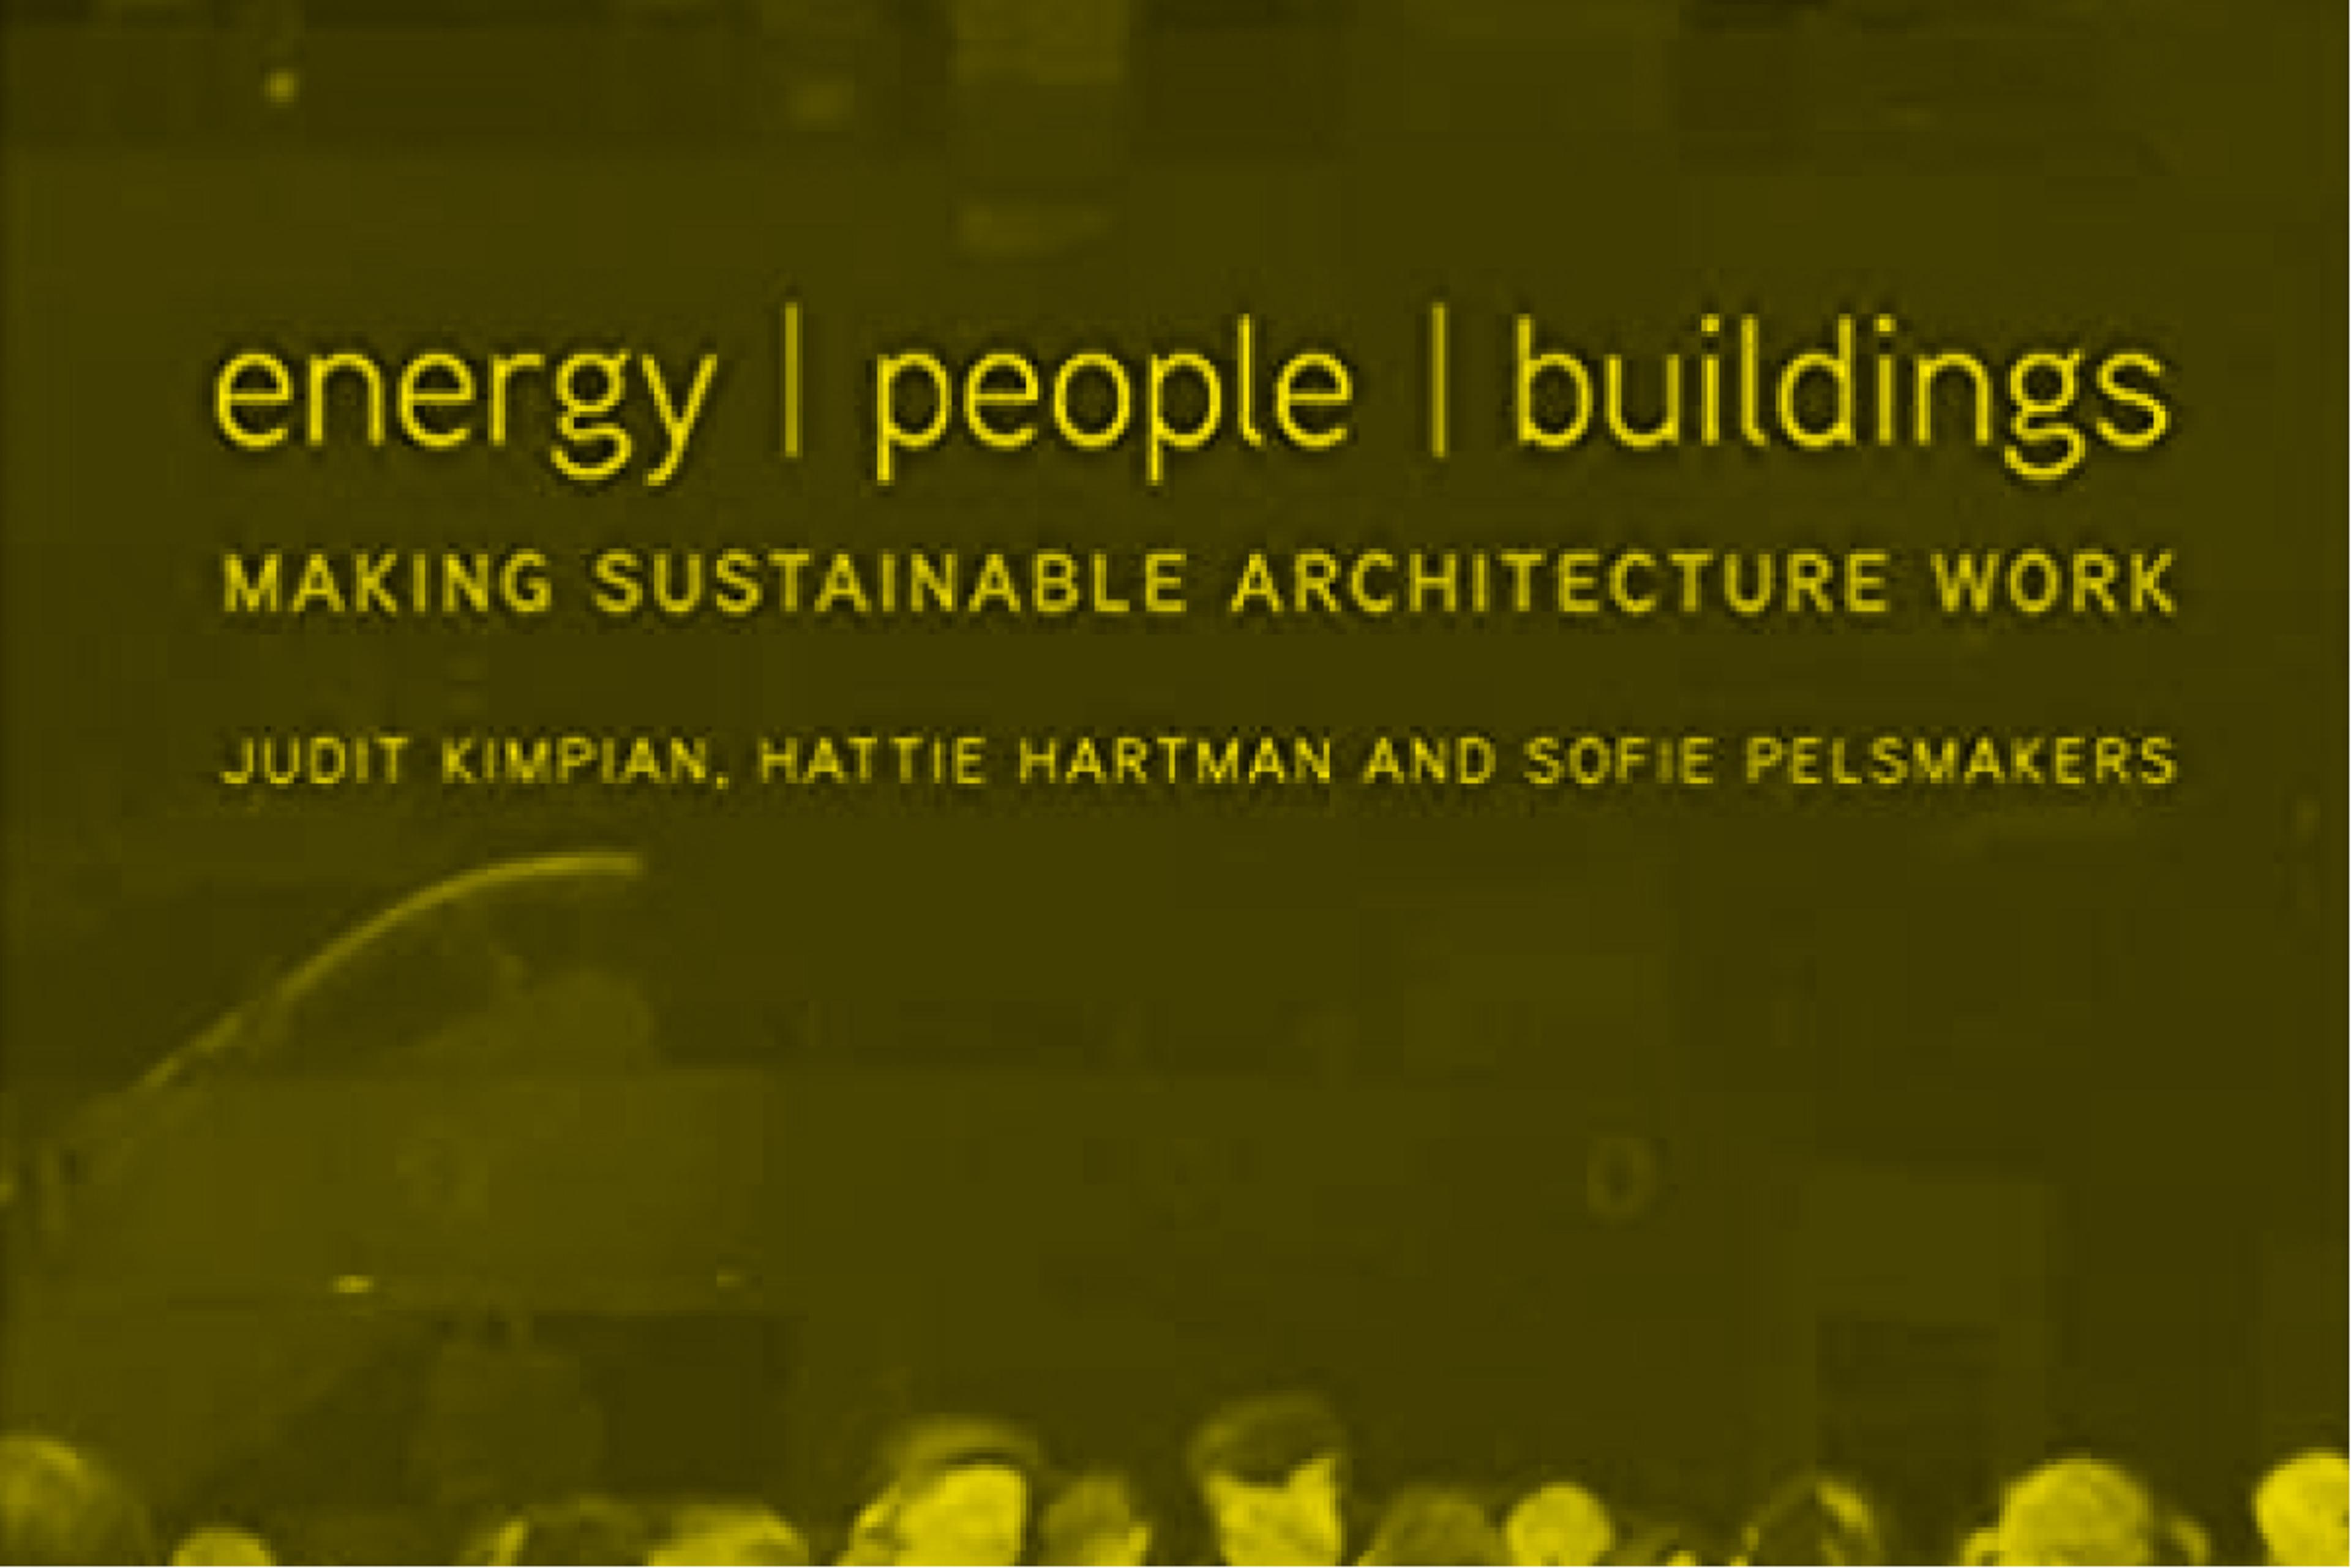 Building Natural Connections with Energy, People, Buildings